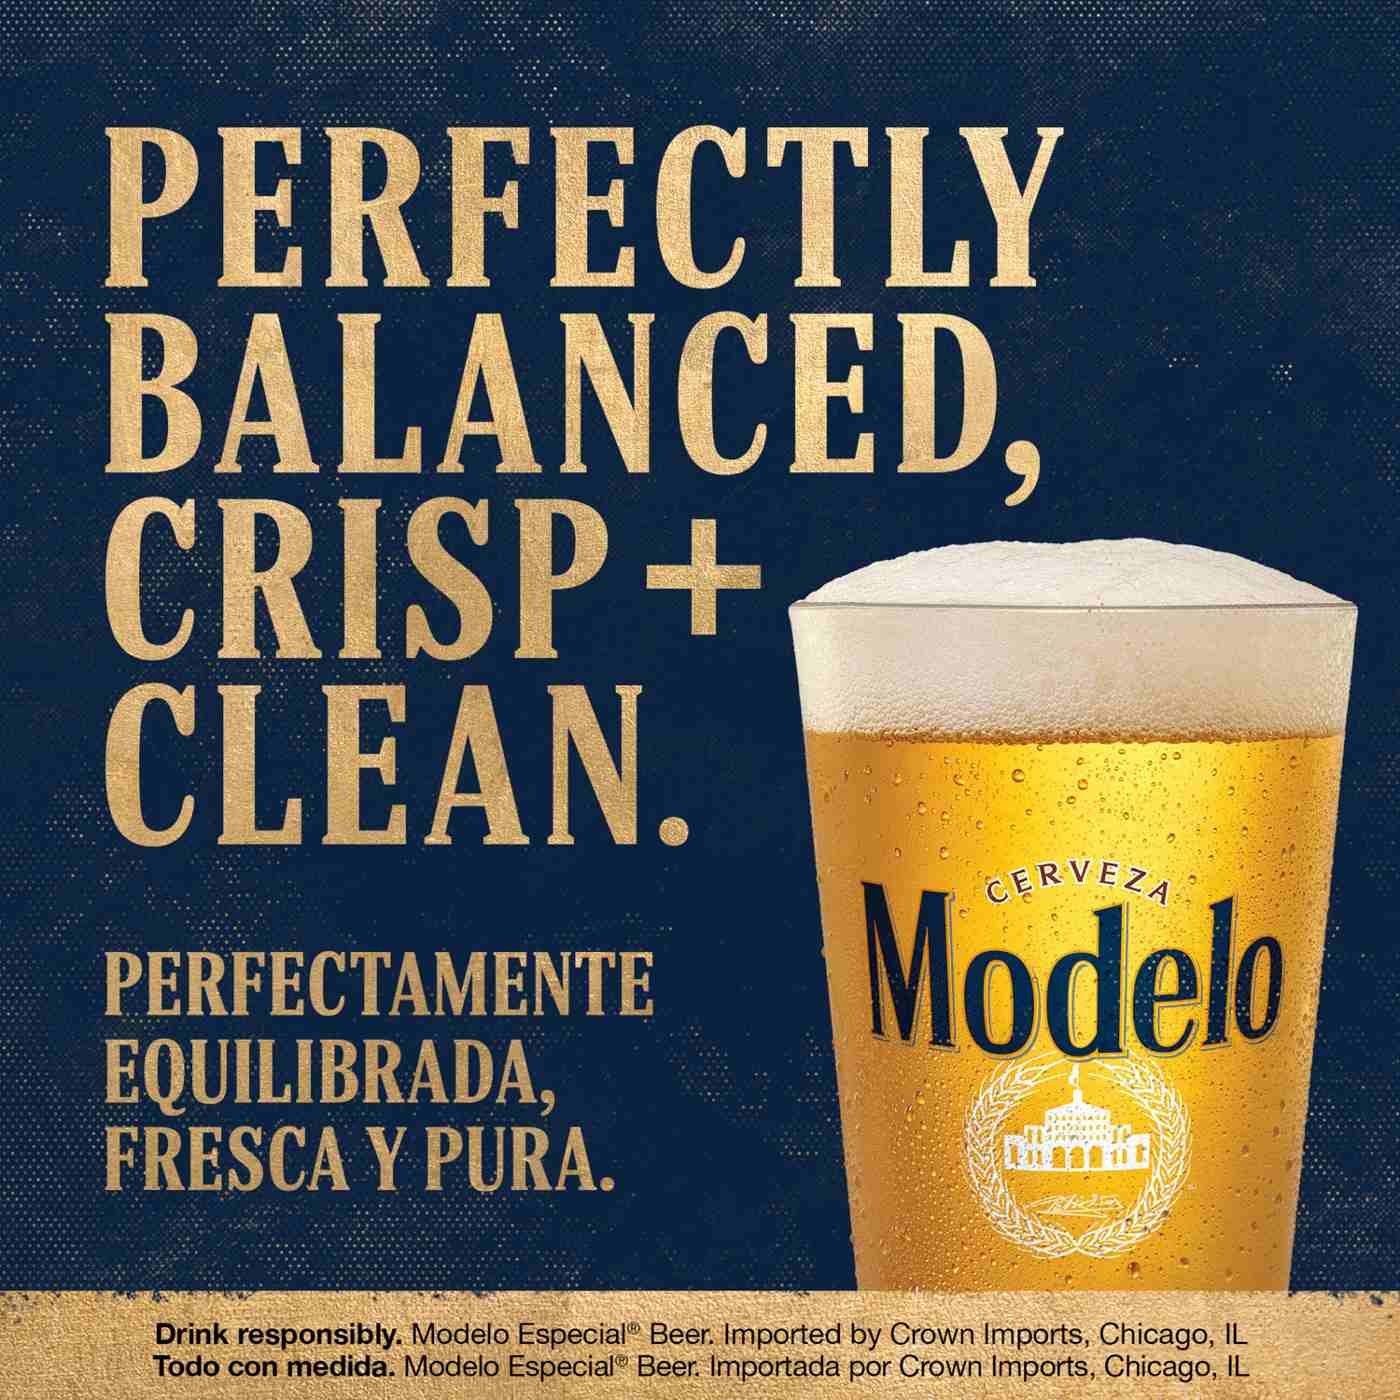 Modelo Especial Mexican Lager Import Beer 12 oz Cans, 6 pk; image 10 of 10